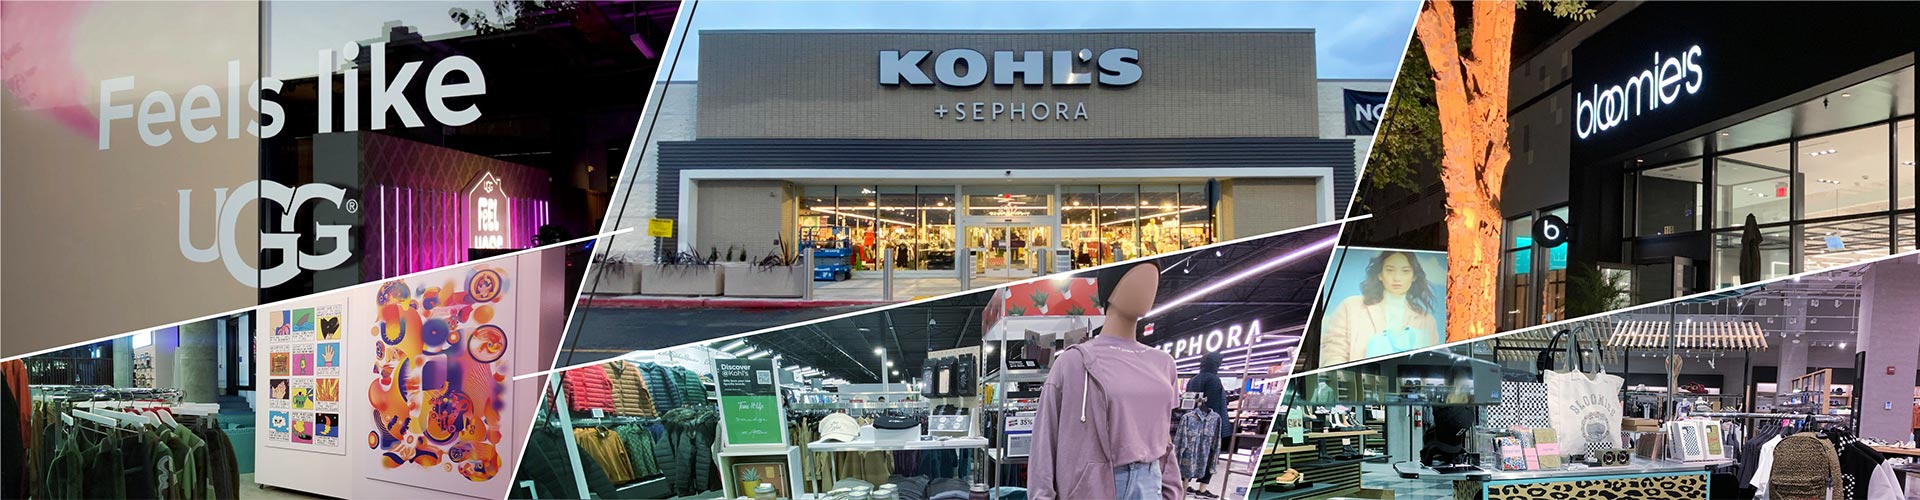 Blog banner featuring collage of storefronts and in-store of UGG, Kohl's, and Bloomies